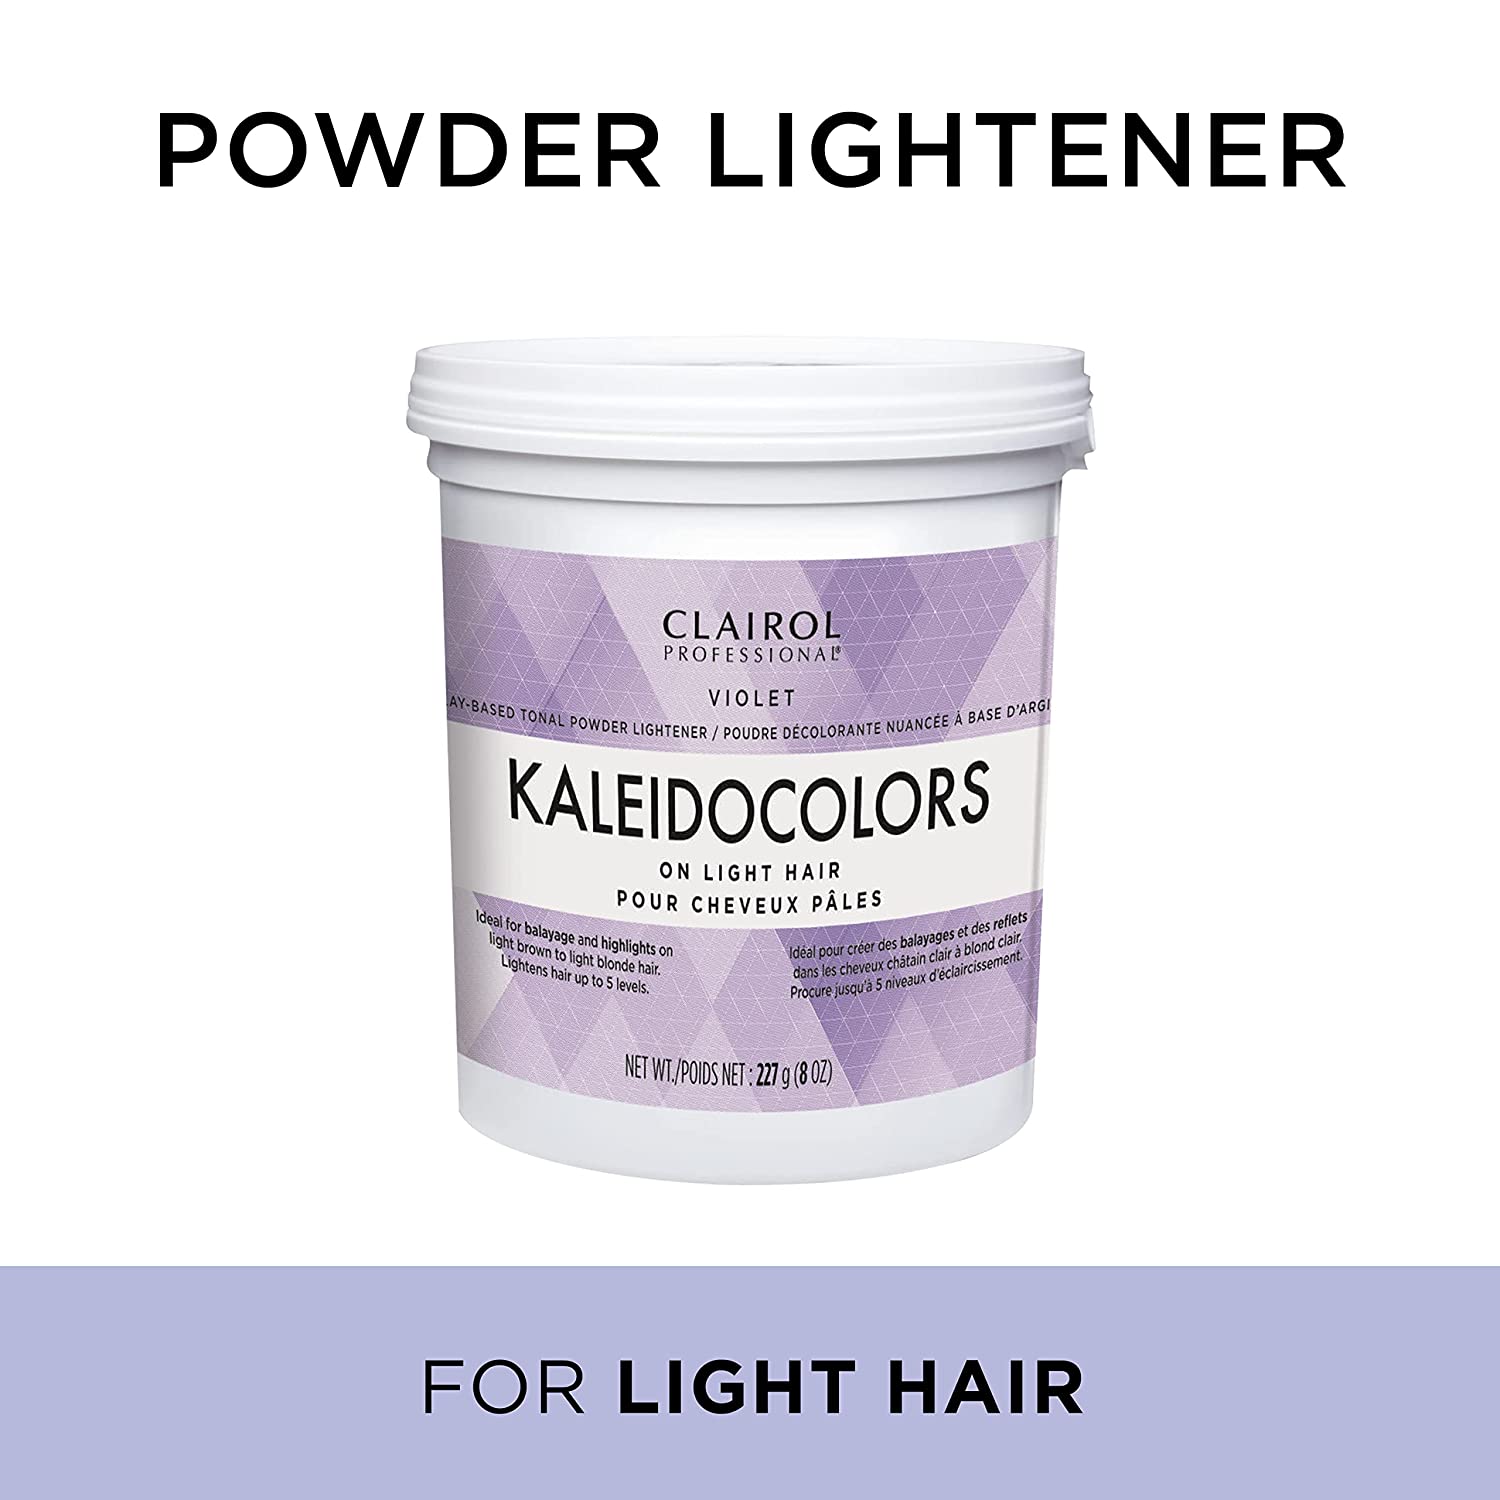 Clairol Professional Kaleidocolors, Violet Tub, 8 oz Find Your New Look Today!